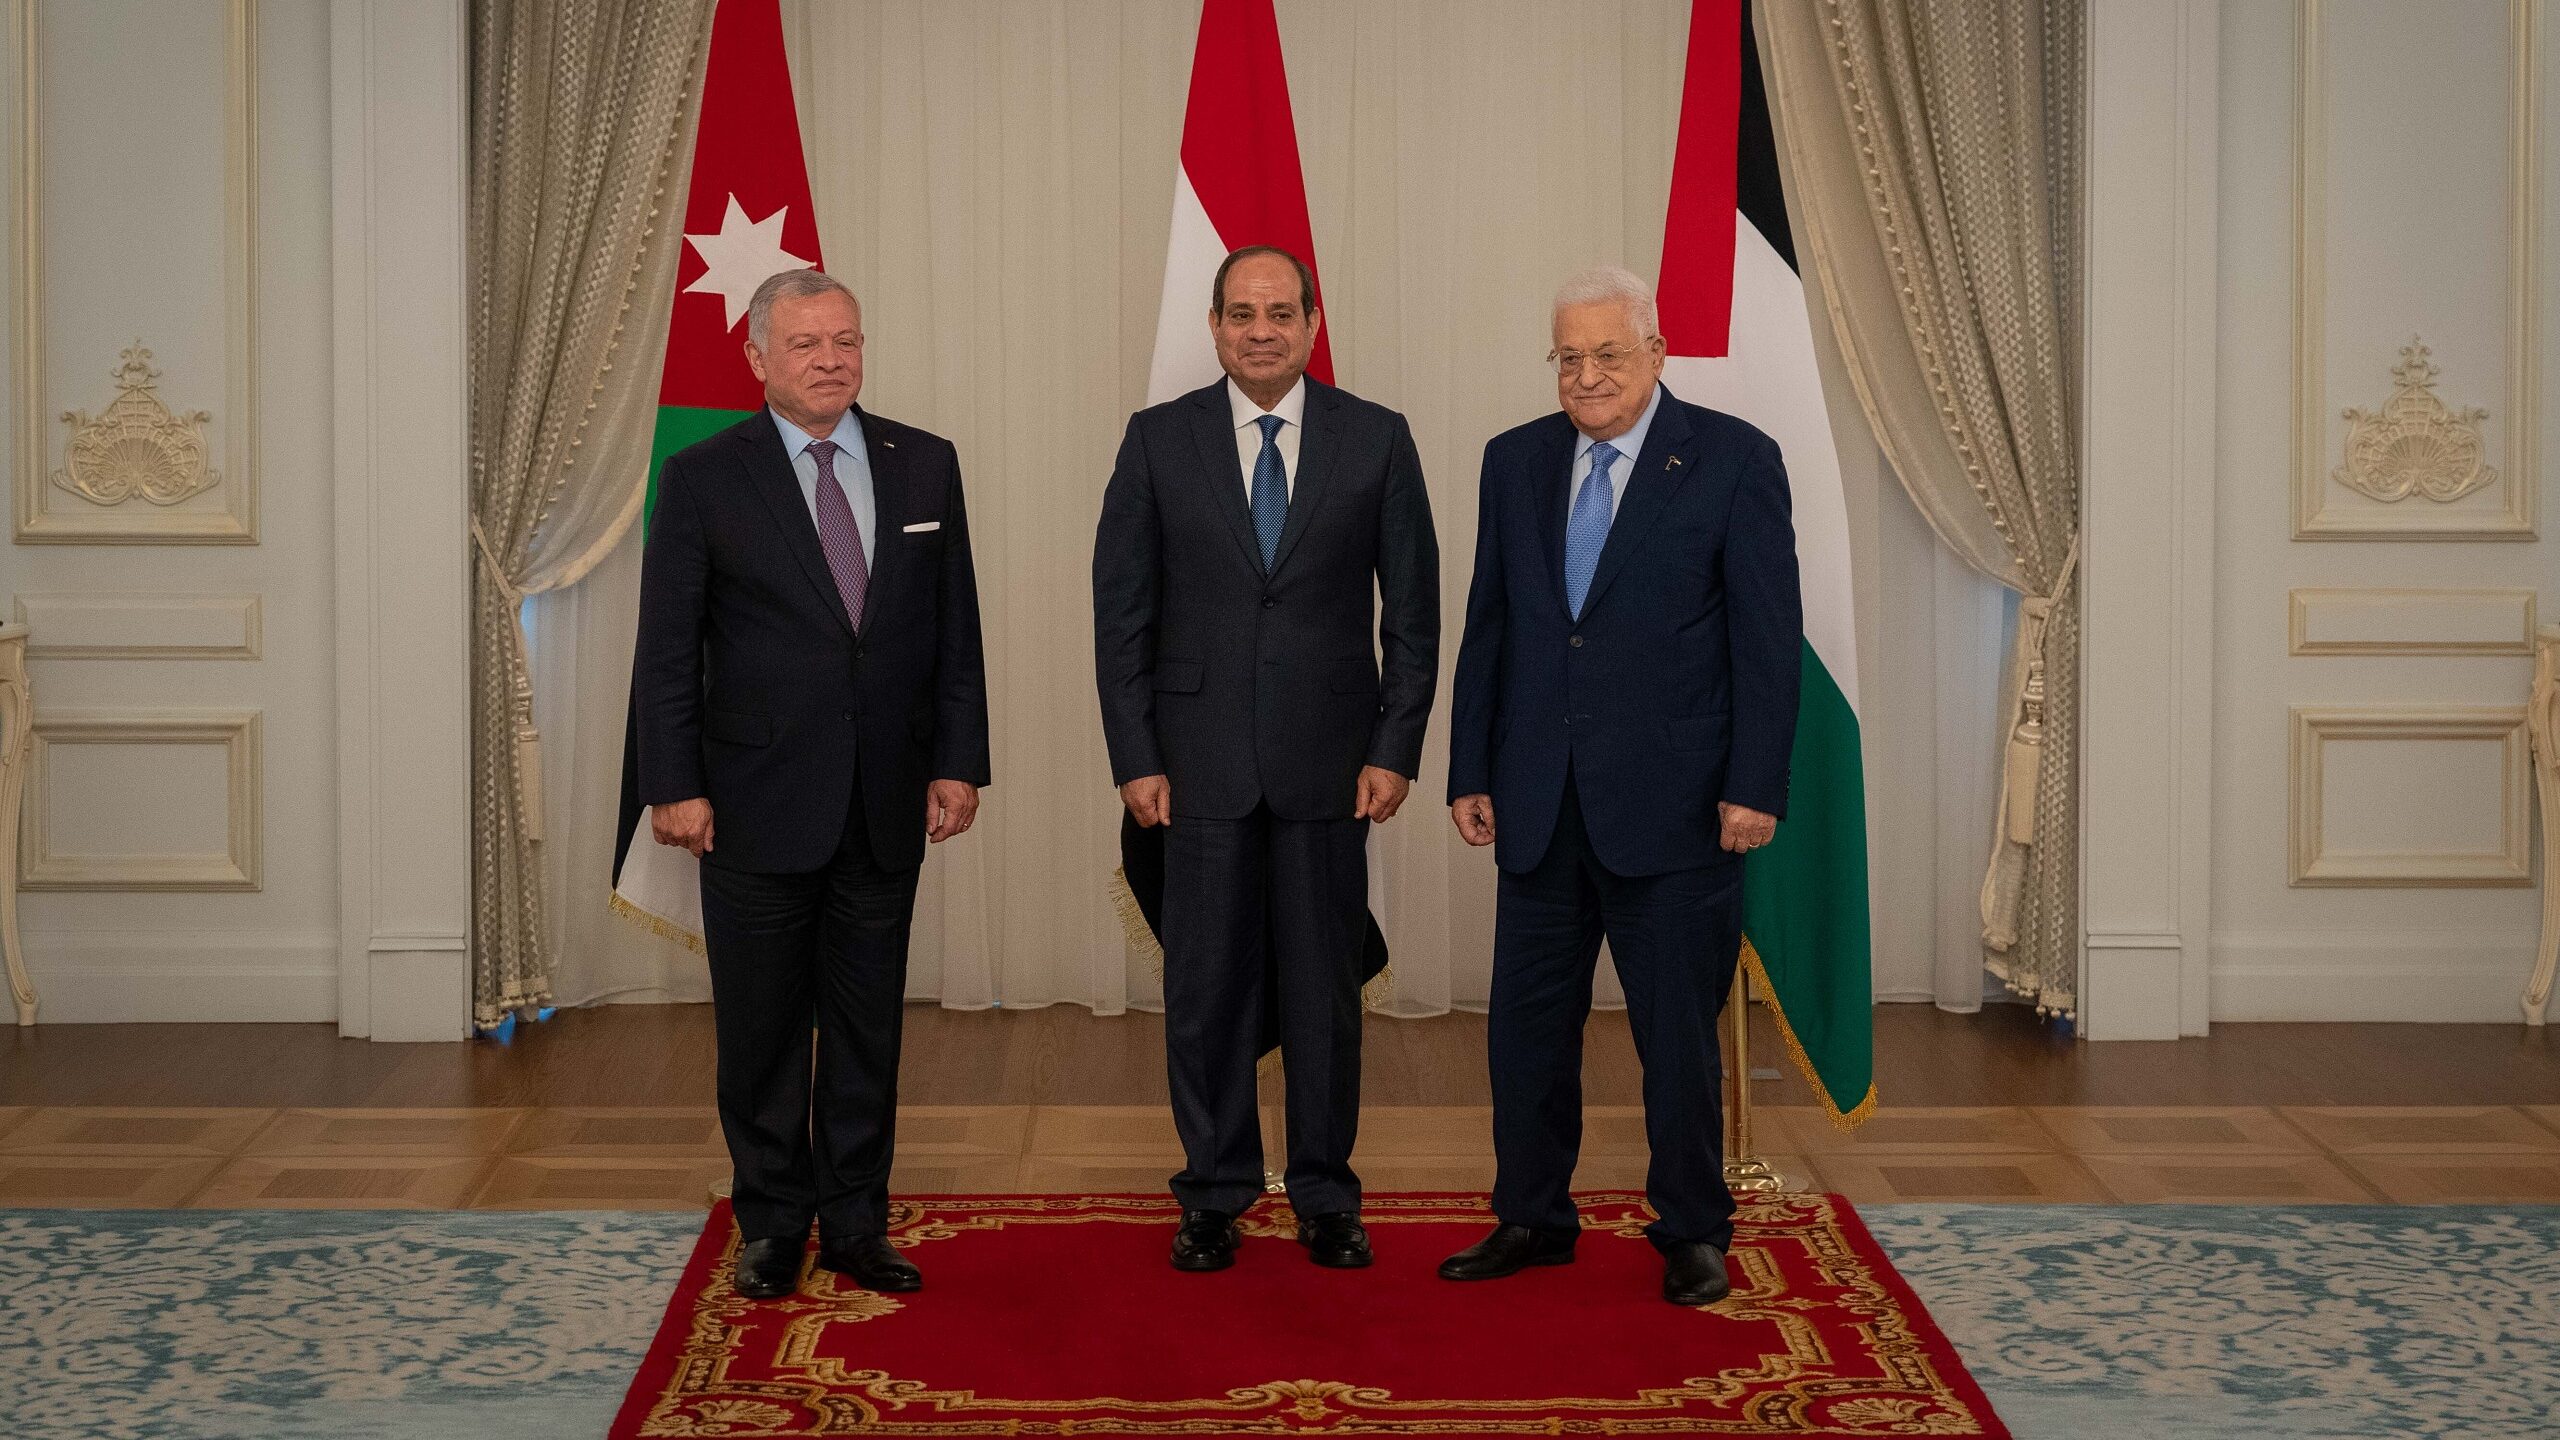 Egyptian, Jordanian and Palestinian Leadership Condemn Israel, Call for Peace